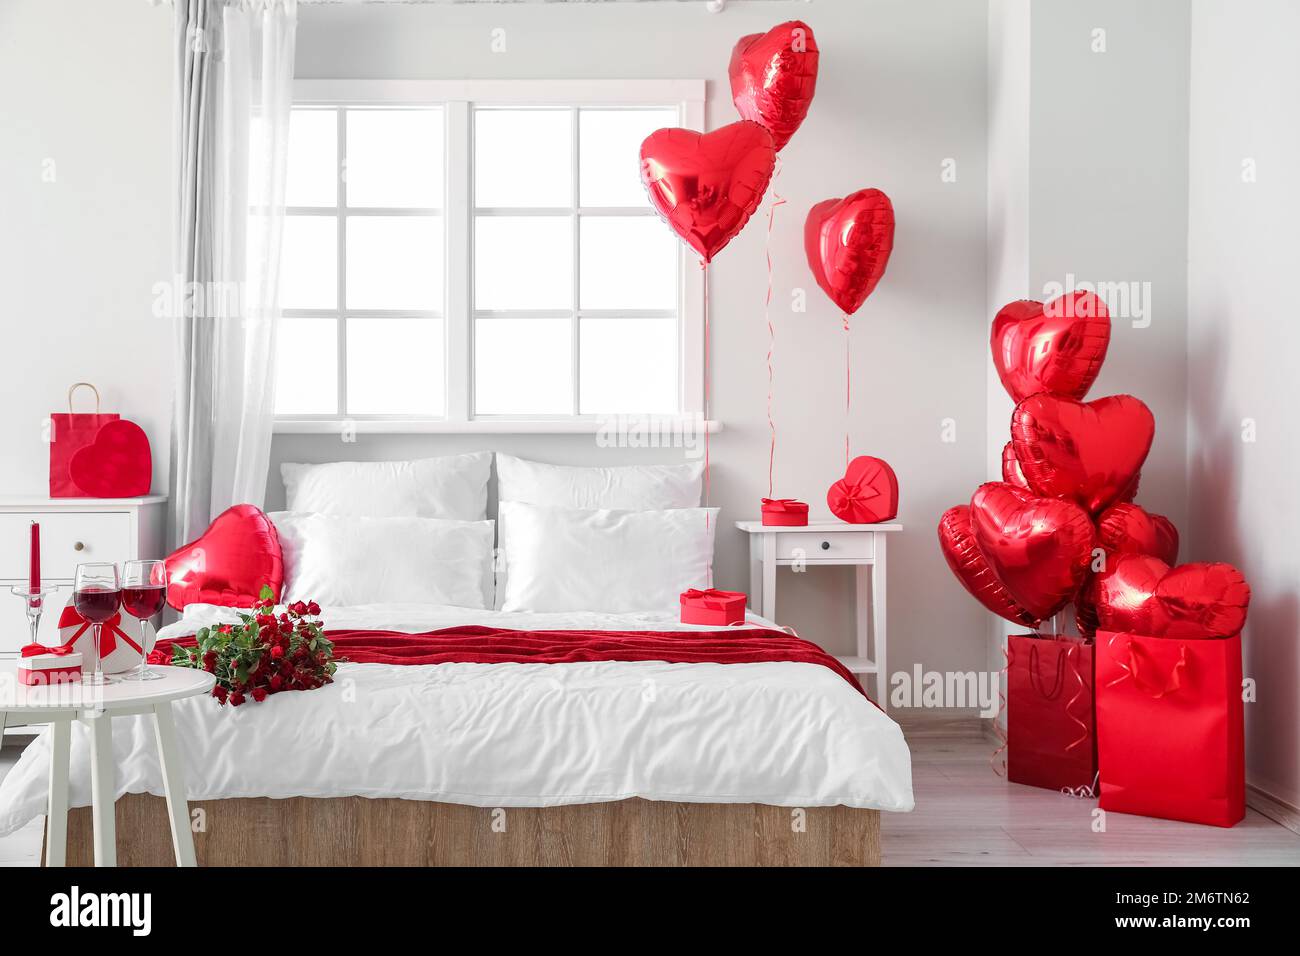 Interior of bedroom decorated for Valentine\'s Day with balloons ...